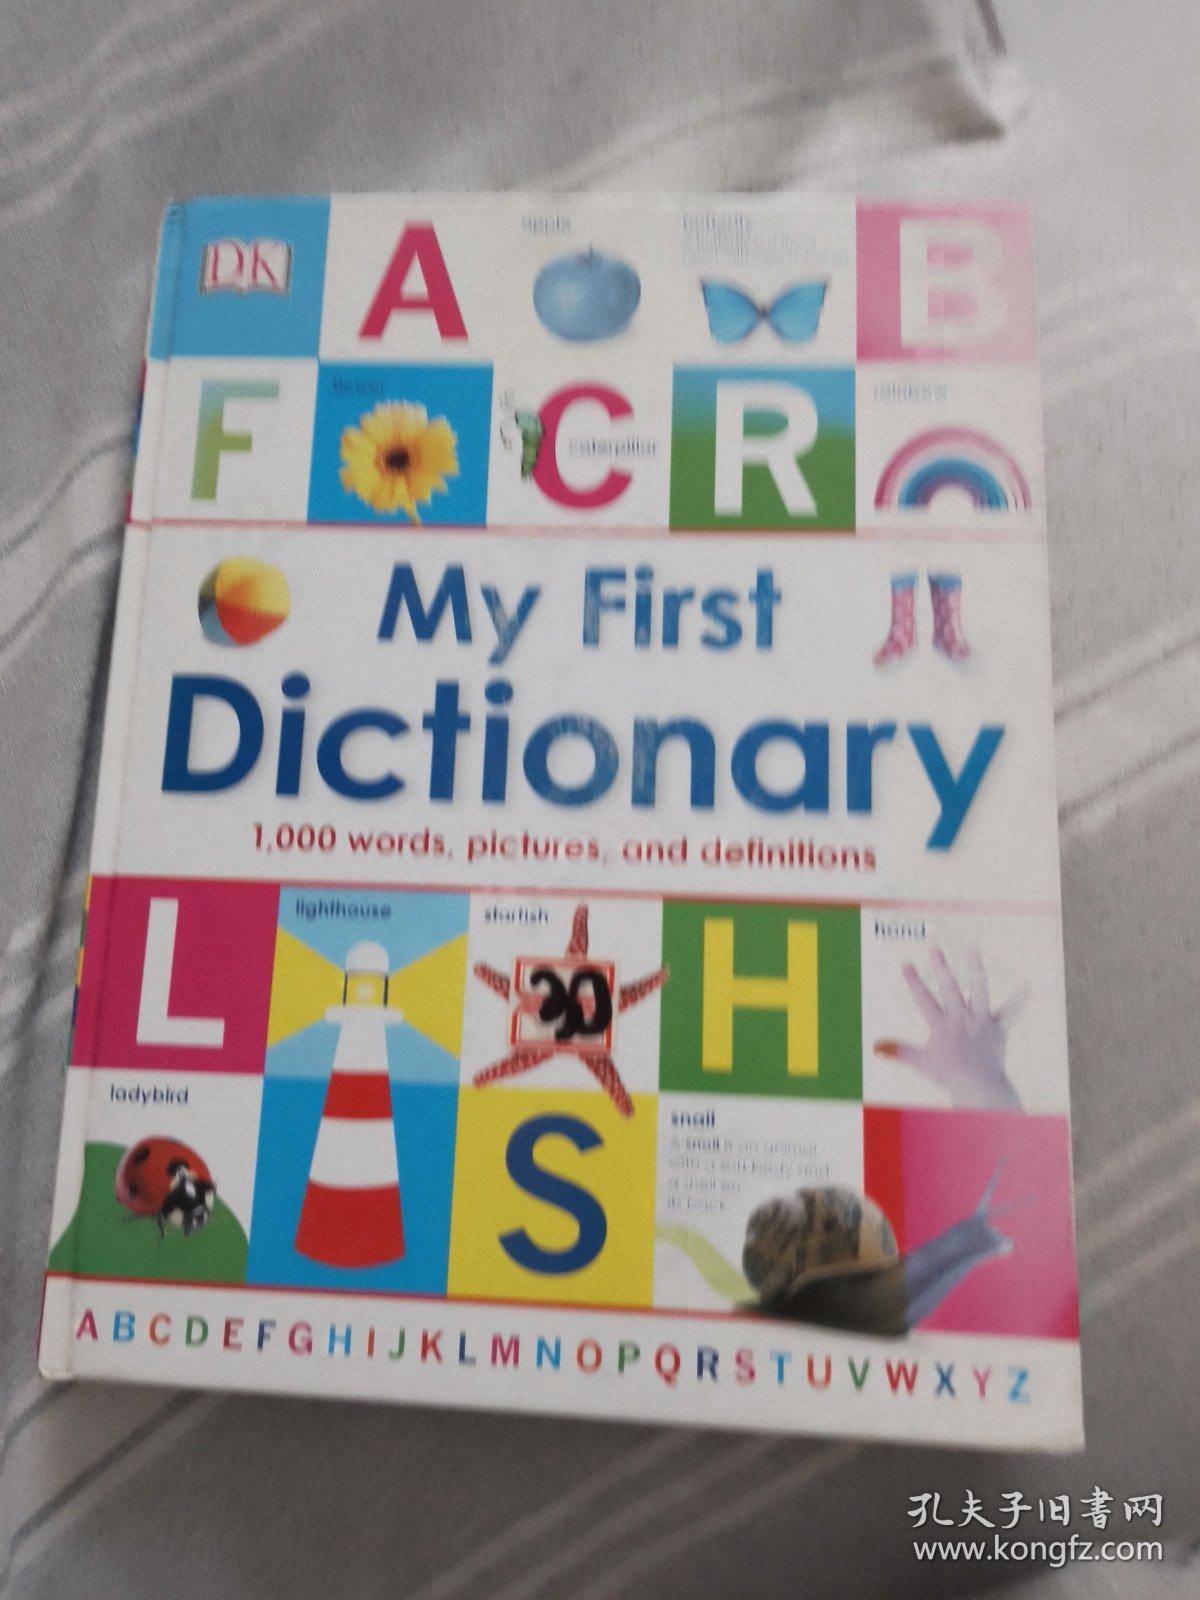 My First Dictionary (DK) 我的第一本词典